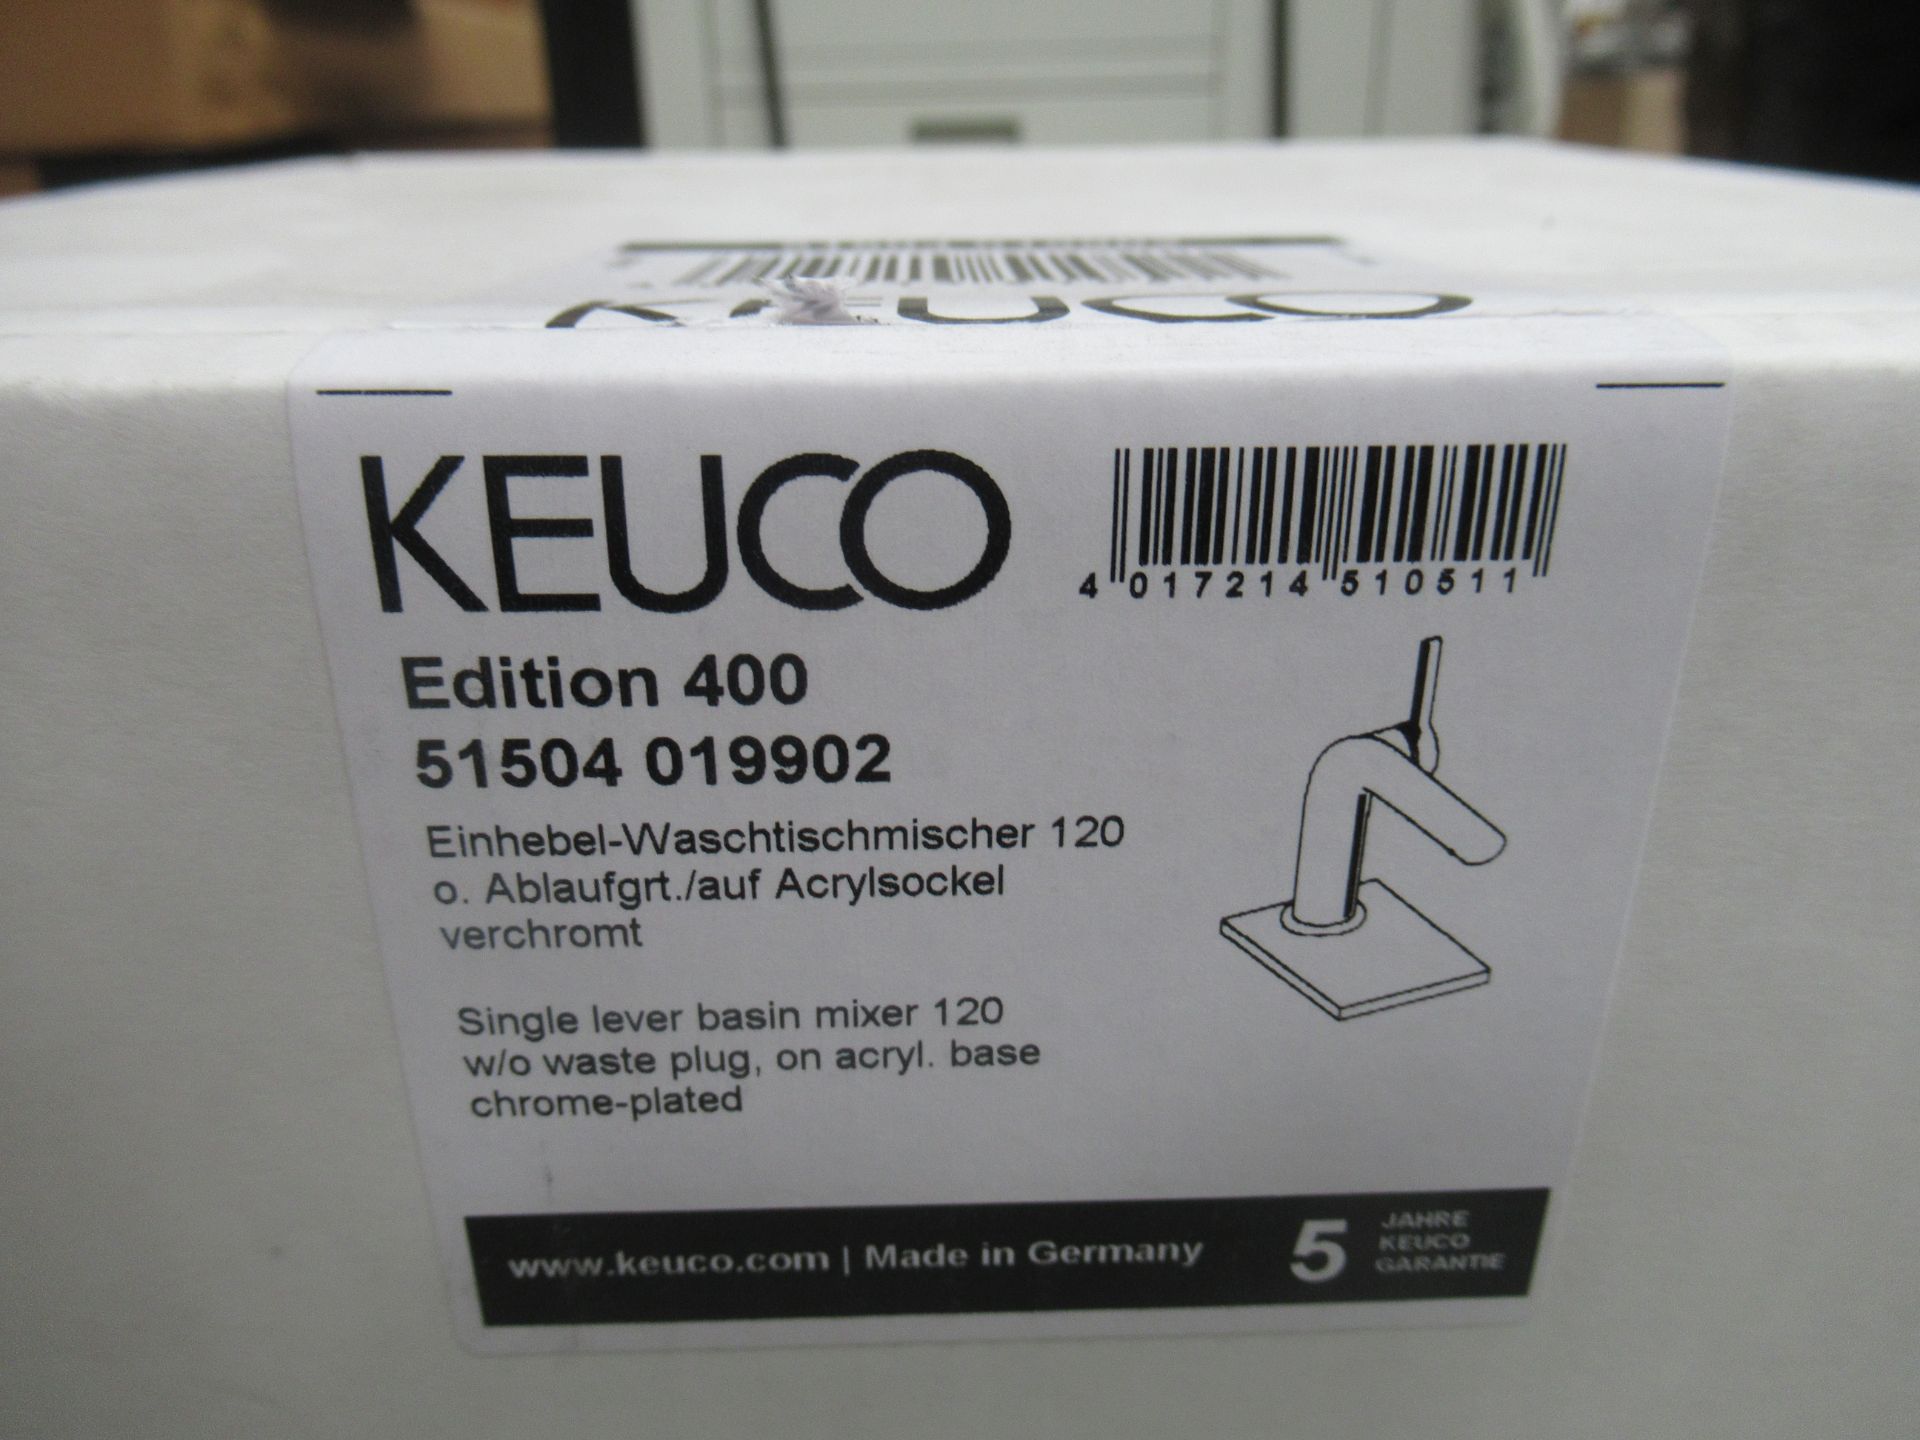 A Keuco Edition 400 Single Lever Basin Mixer 120- Tap, Chrome Plated, P/N 51504-019902 - Image 2 of 3